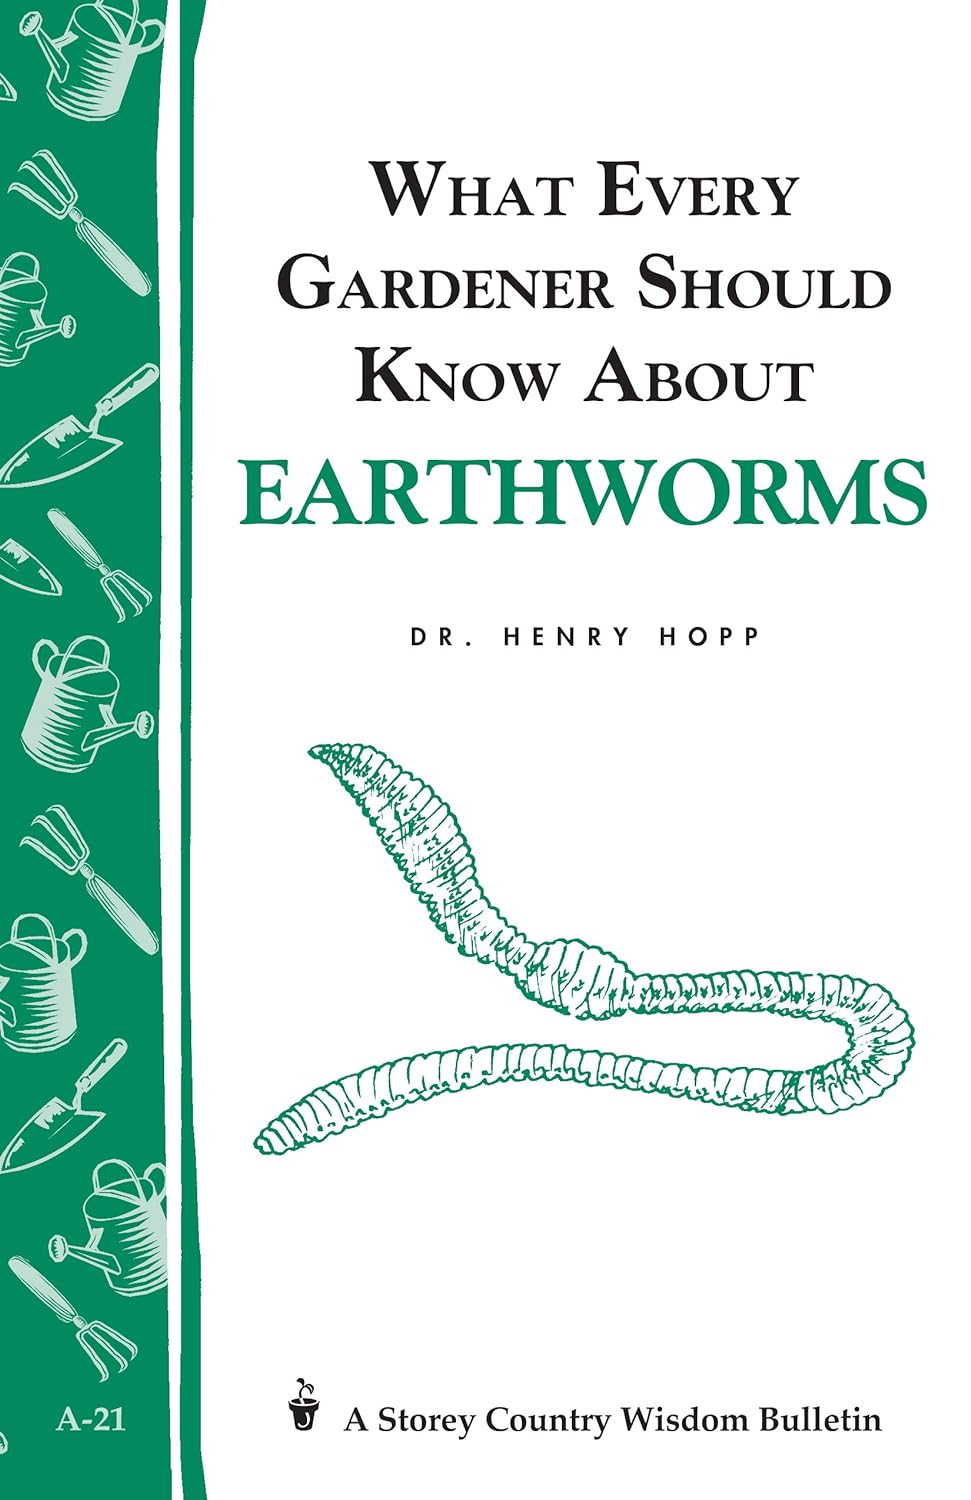 Storey's Country Wisdom Bulletin: What Every Gardener Should Know About Earthworms - by Henry Hopp